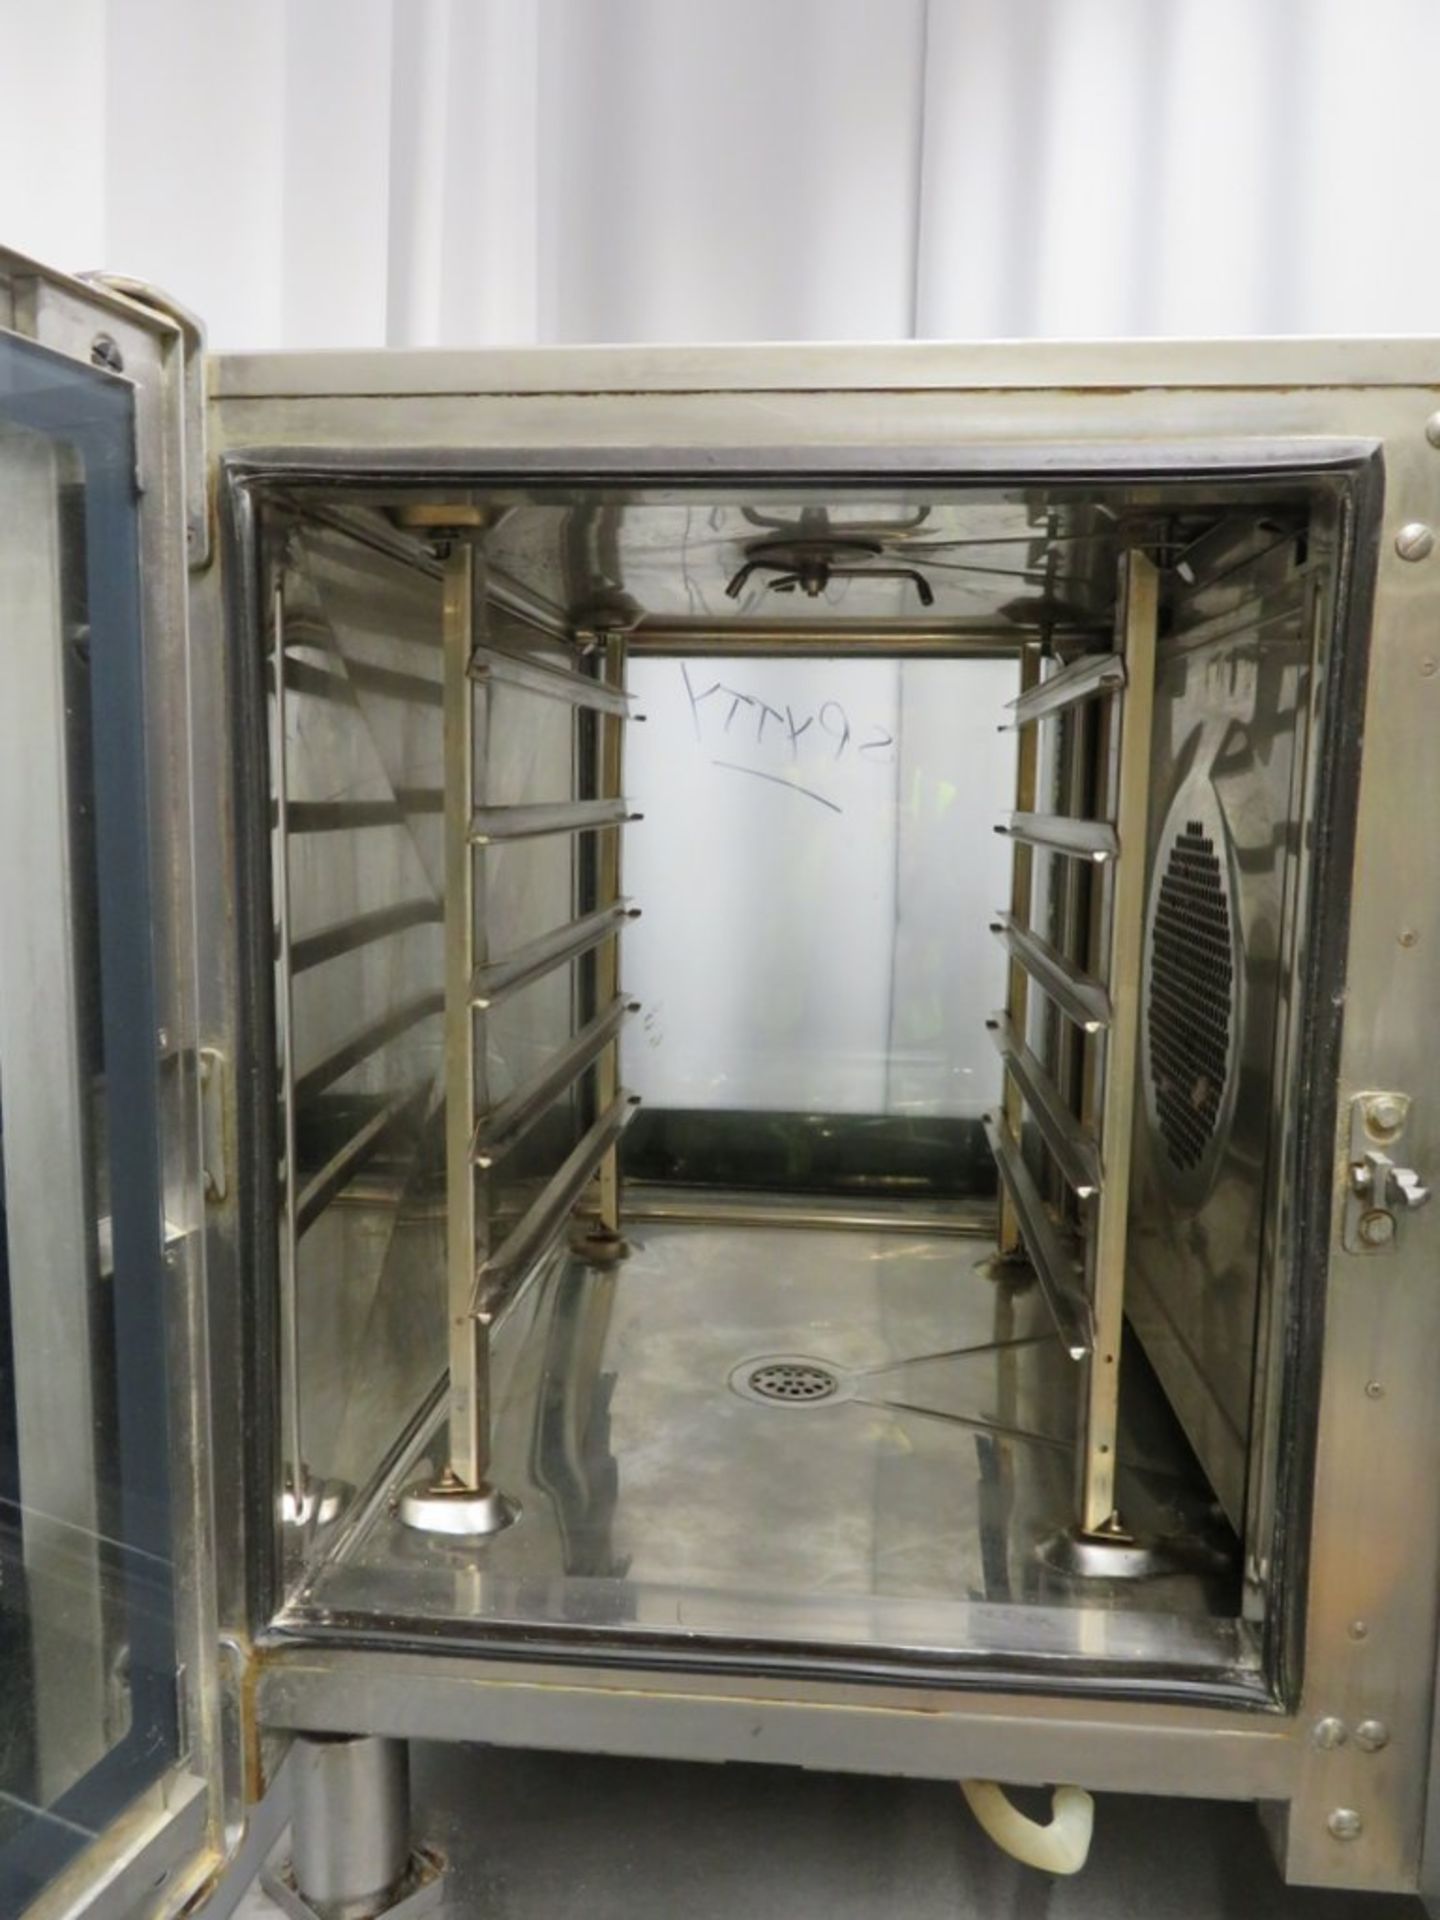 Houno B5 5 grid combi oven, 3 phase electric, dual opening front and back - Image 5 of 9